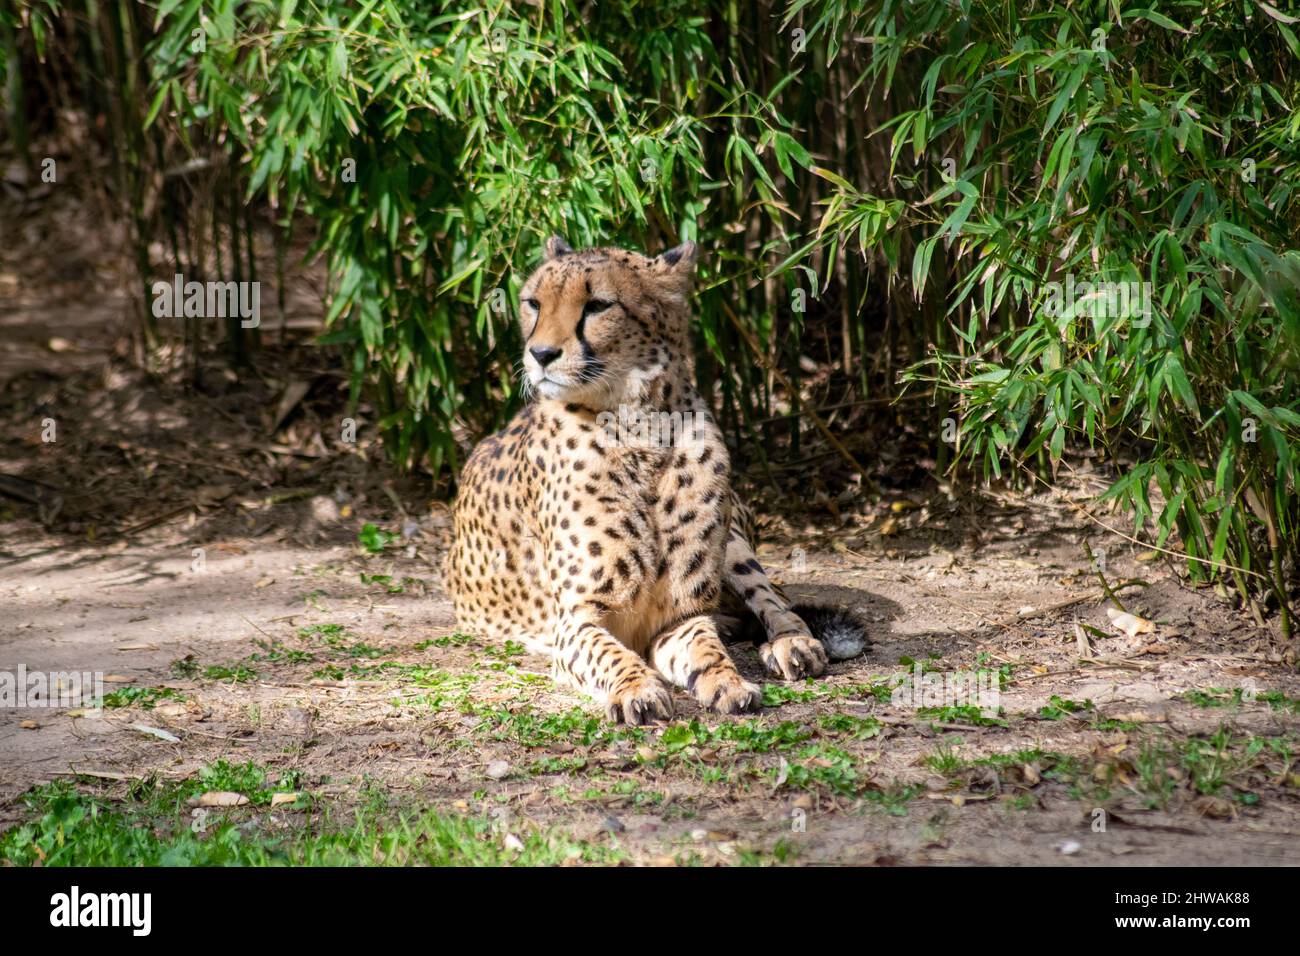 The cheetah portrait, resting, (Acinonyx jubatus) is a large cat native to Africa and central Iran. It is the fastest land animal.Threatened species. Stock Photo